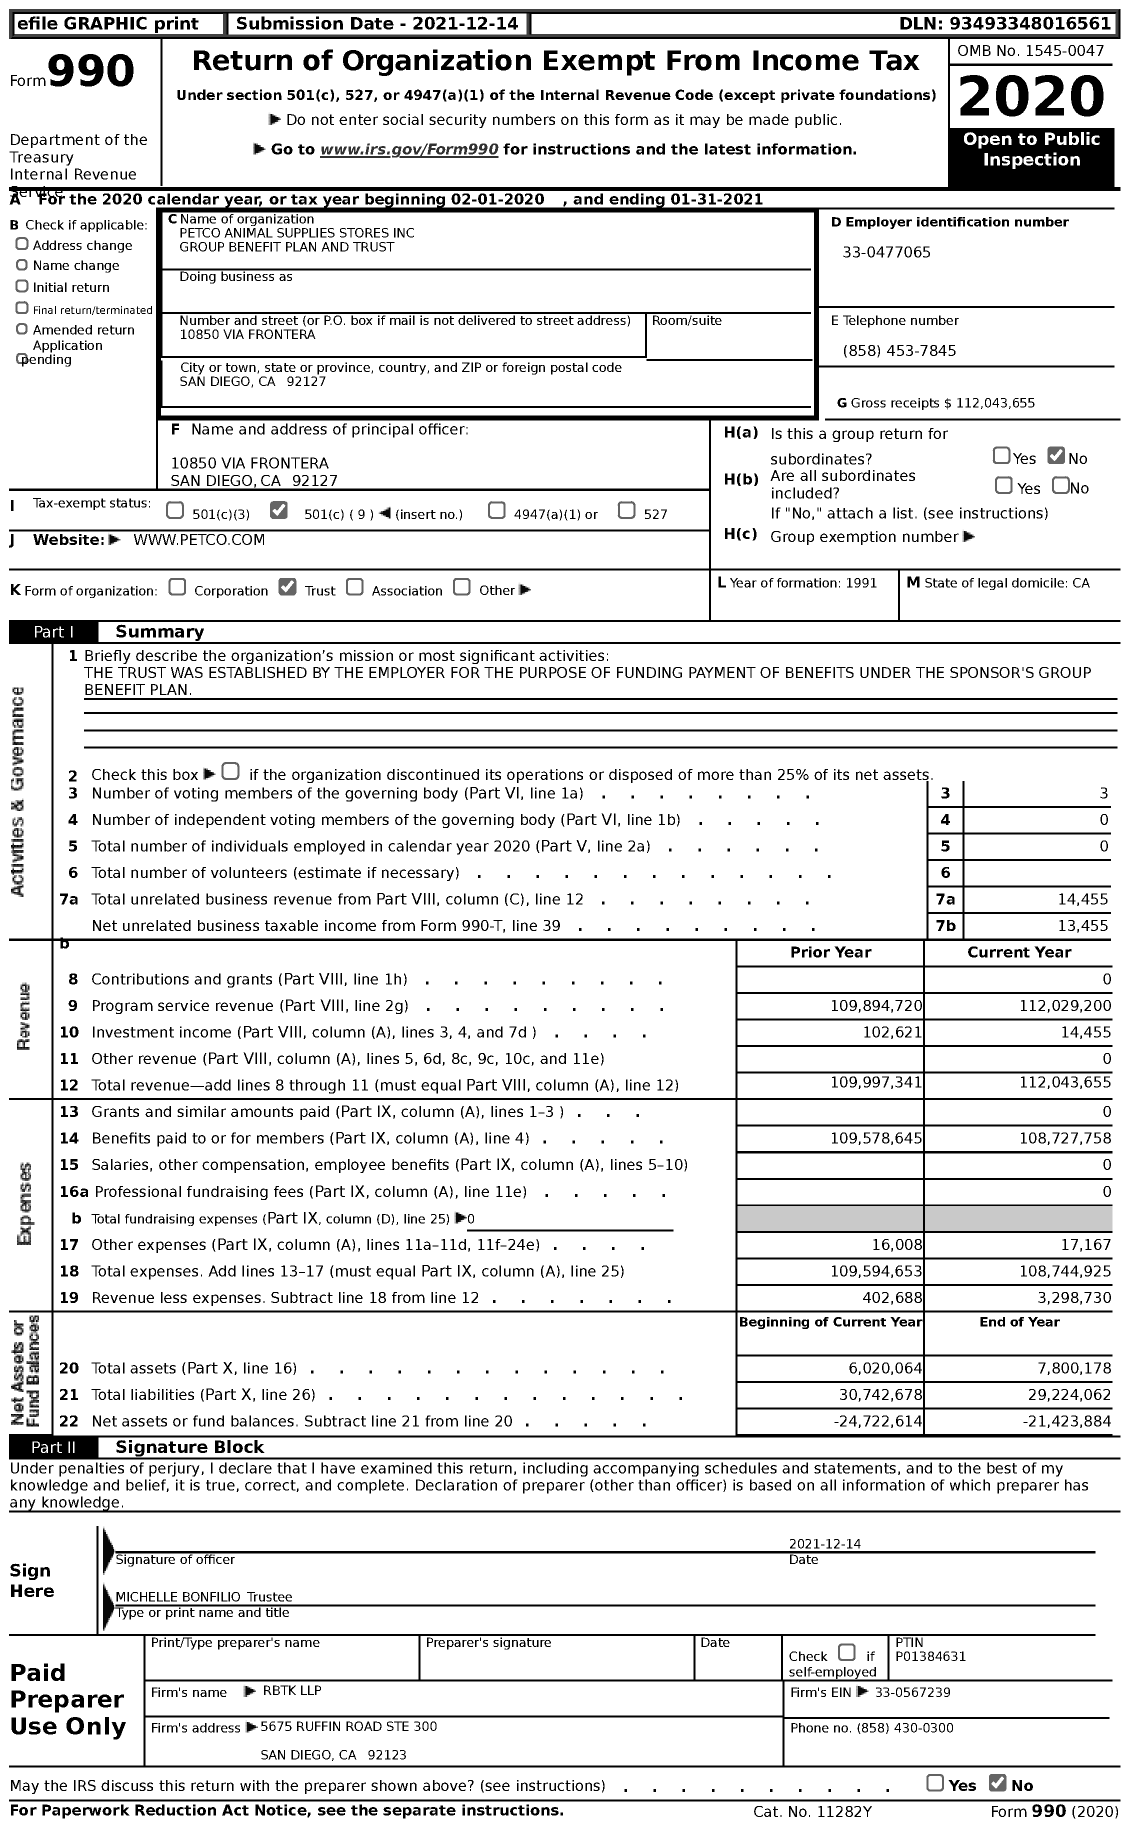 Image of first page of 2020 Form 990 for Petco Animal Supplies Stores Group Benefit Plan and Trust